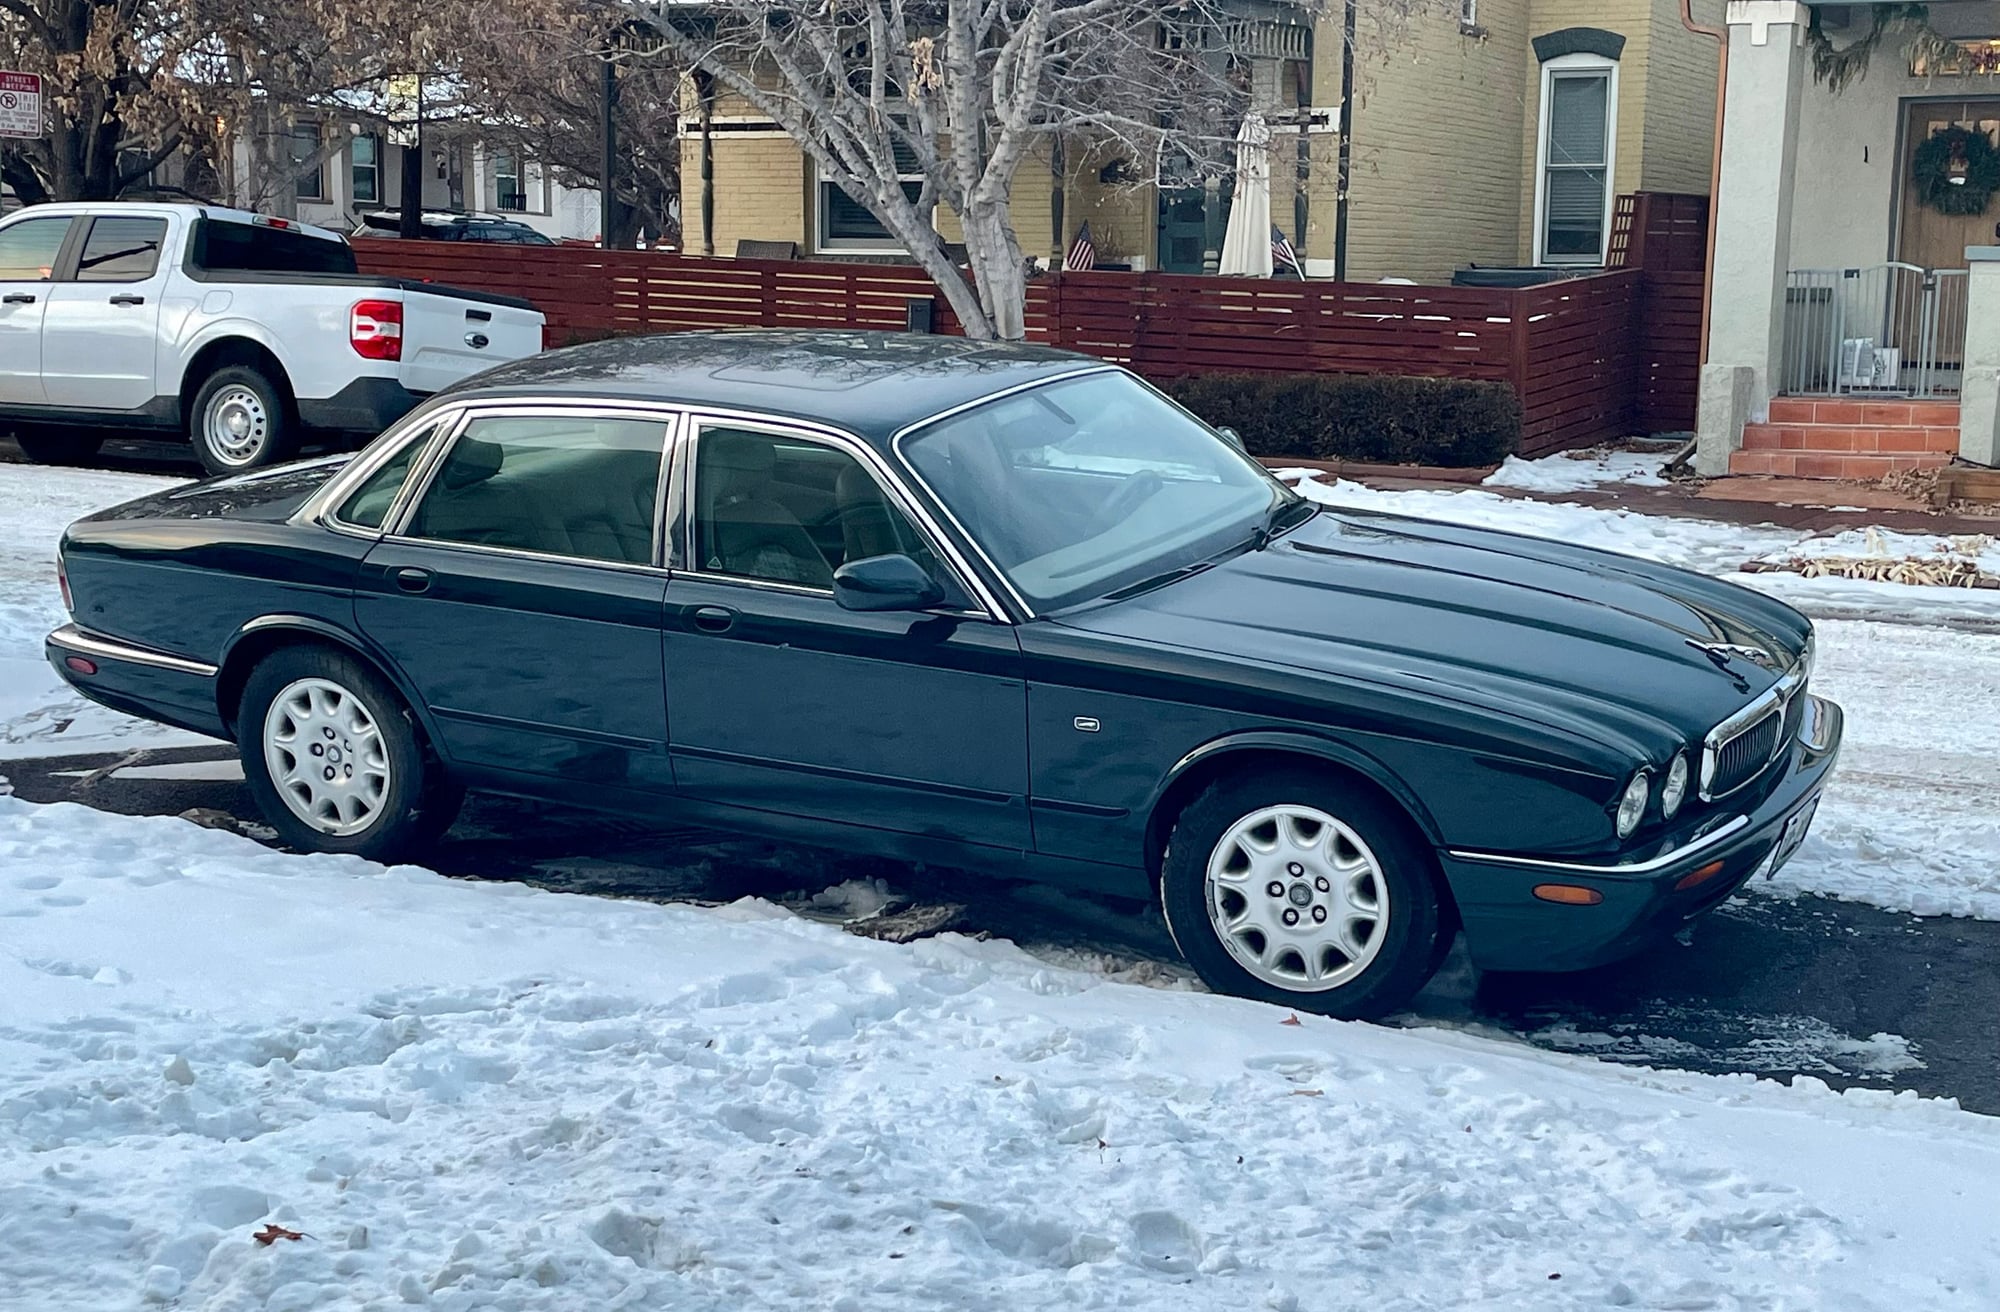 2002 Jaguar XJ8 - 2002 Green XJ8 Rebuilt computer installed 2023. Been stored so needs some tlc. Smooth - Used - VIN SAJDA14C42LF47769 - 110,500 Miles - 8 cyl - 2WD - Automatic - Sedan - Denver, CO 80211, United States